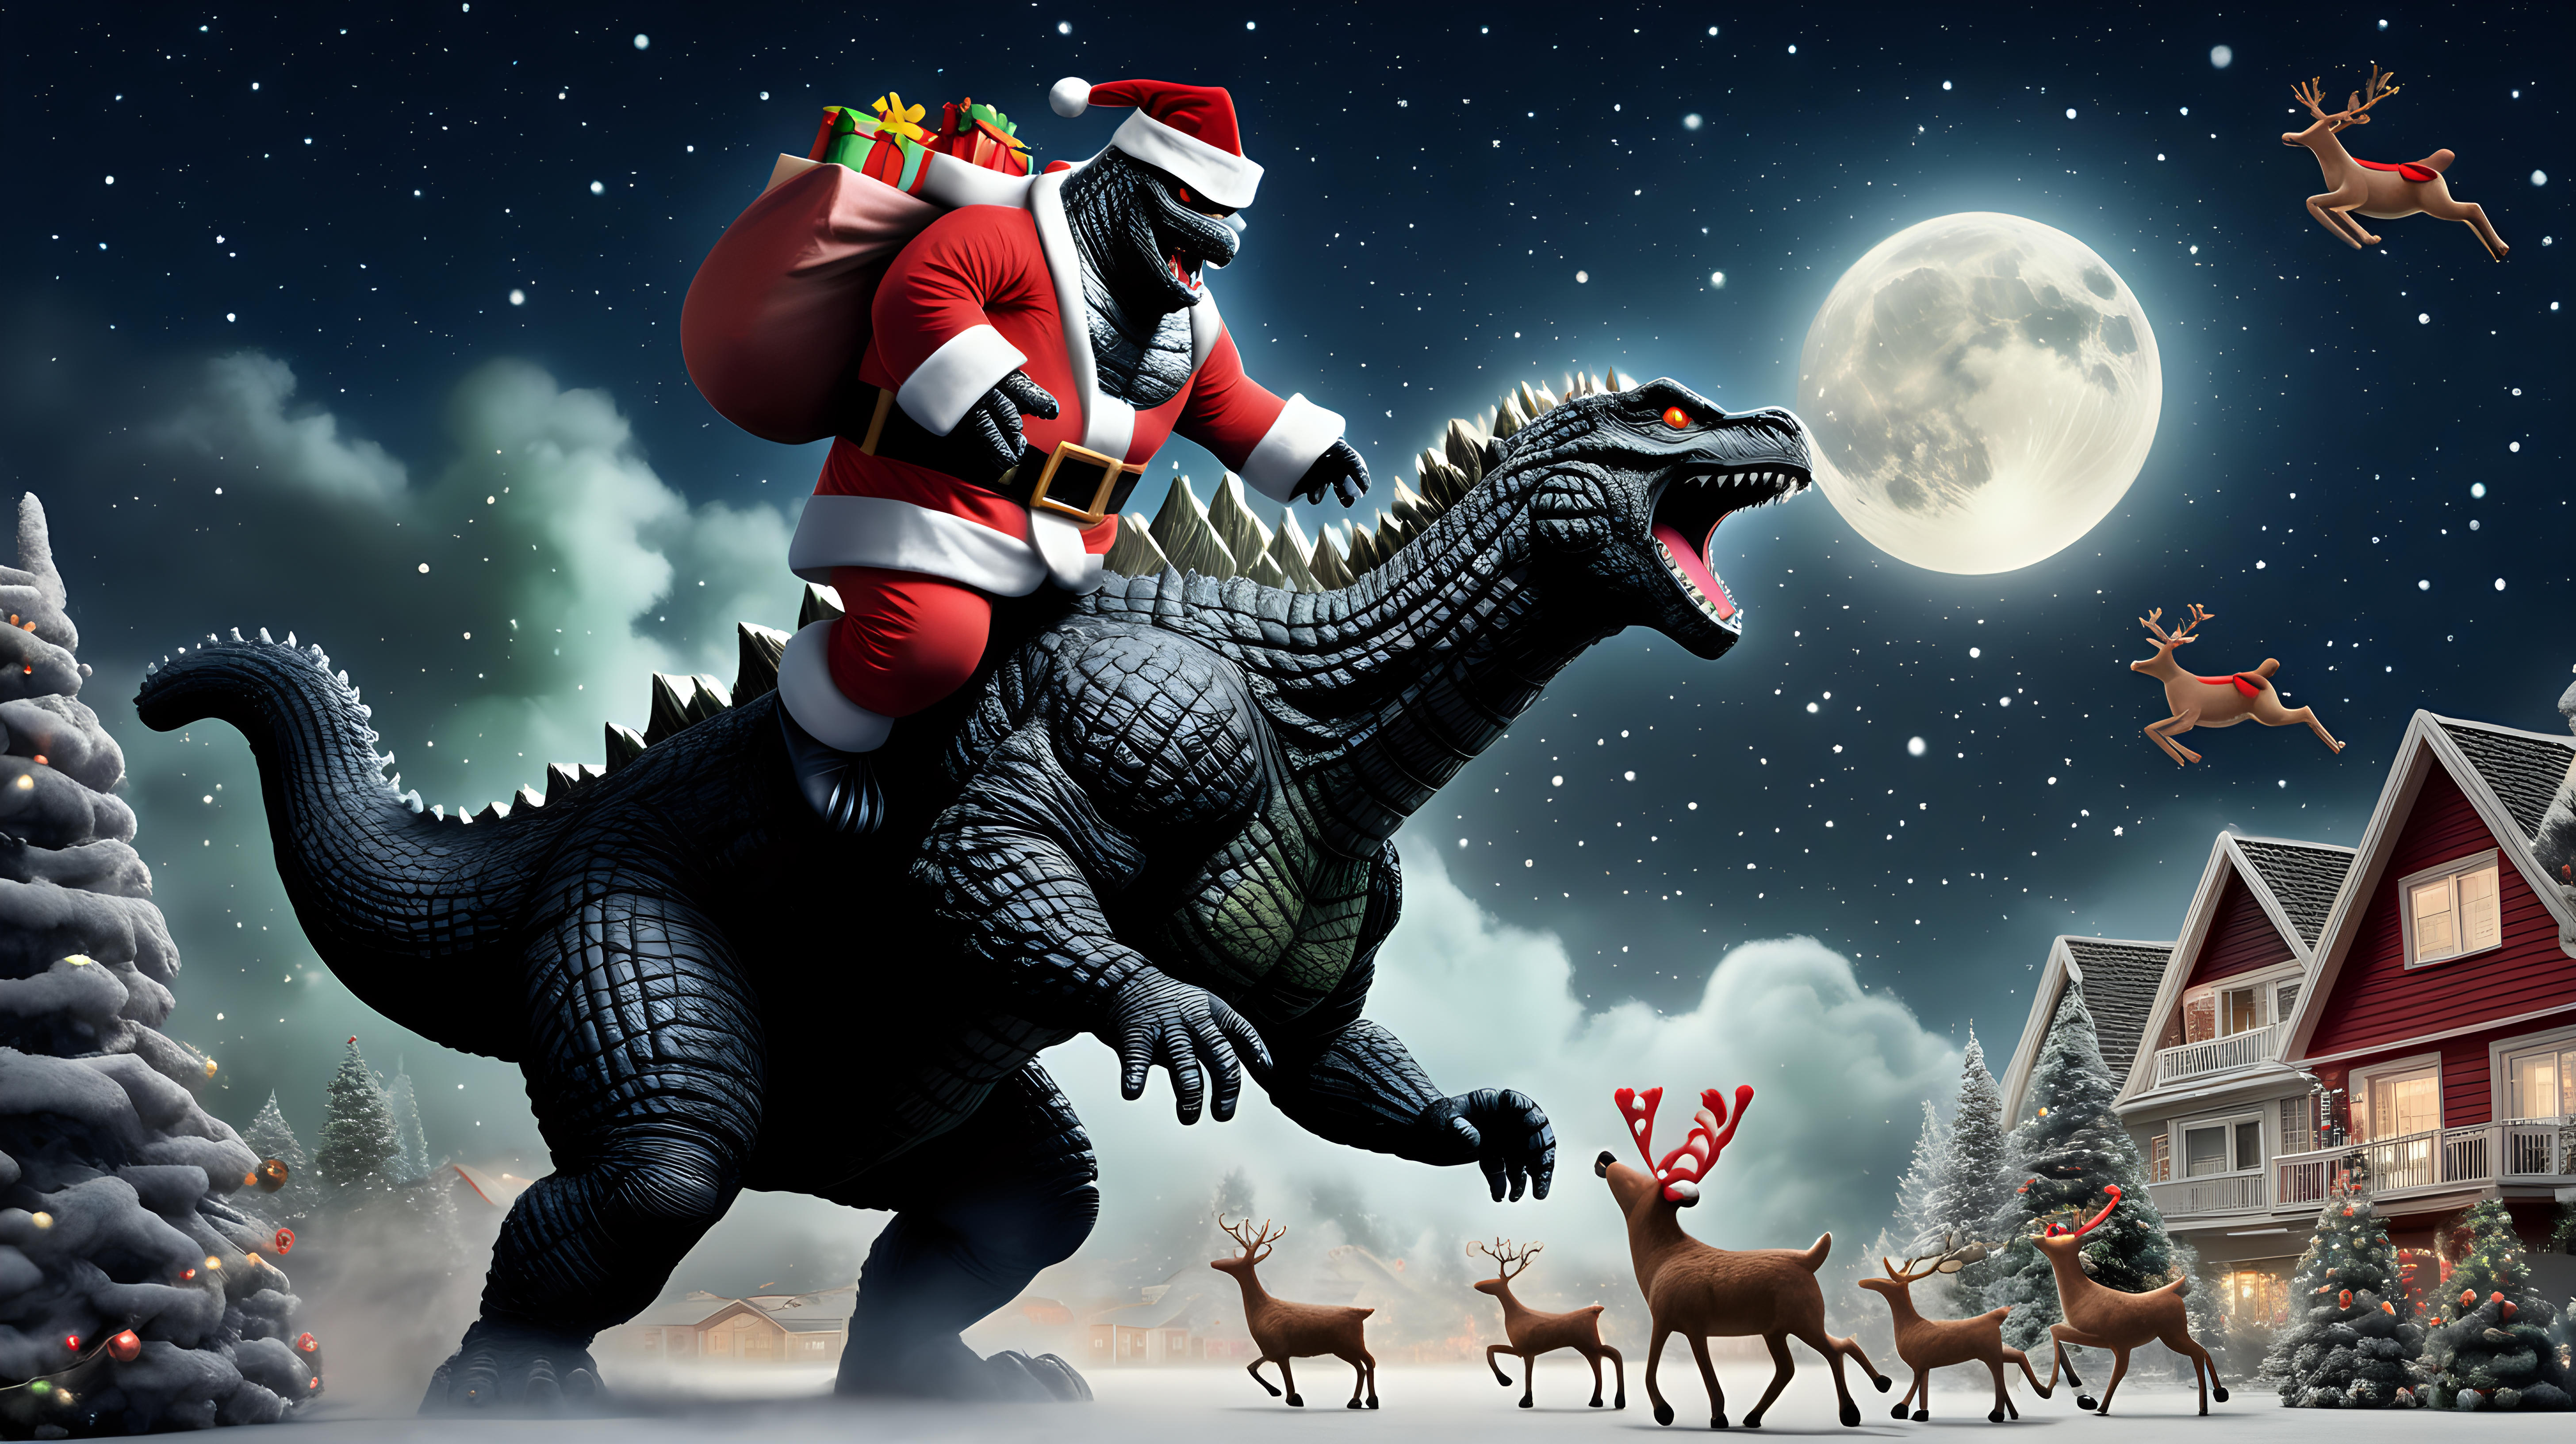 Godzilla chasing Santa and his reindeer in the